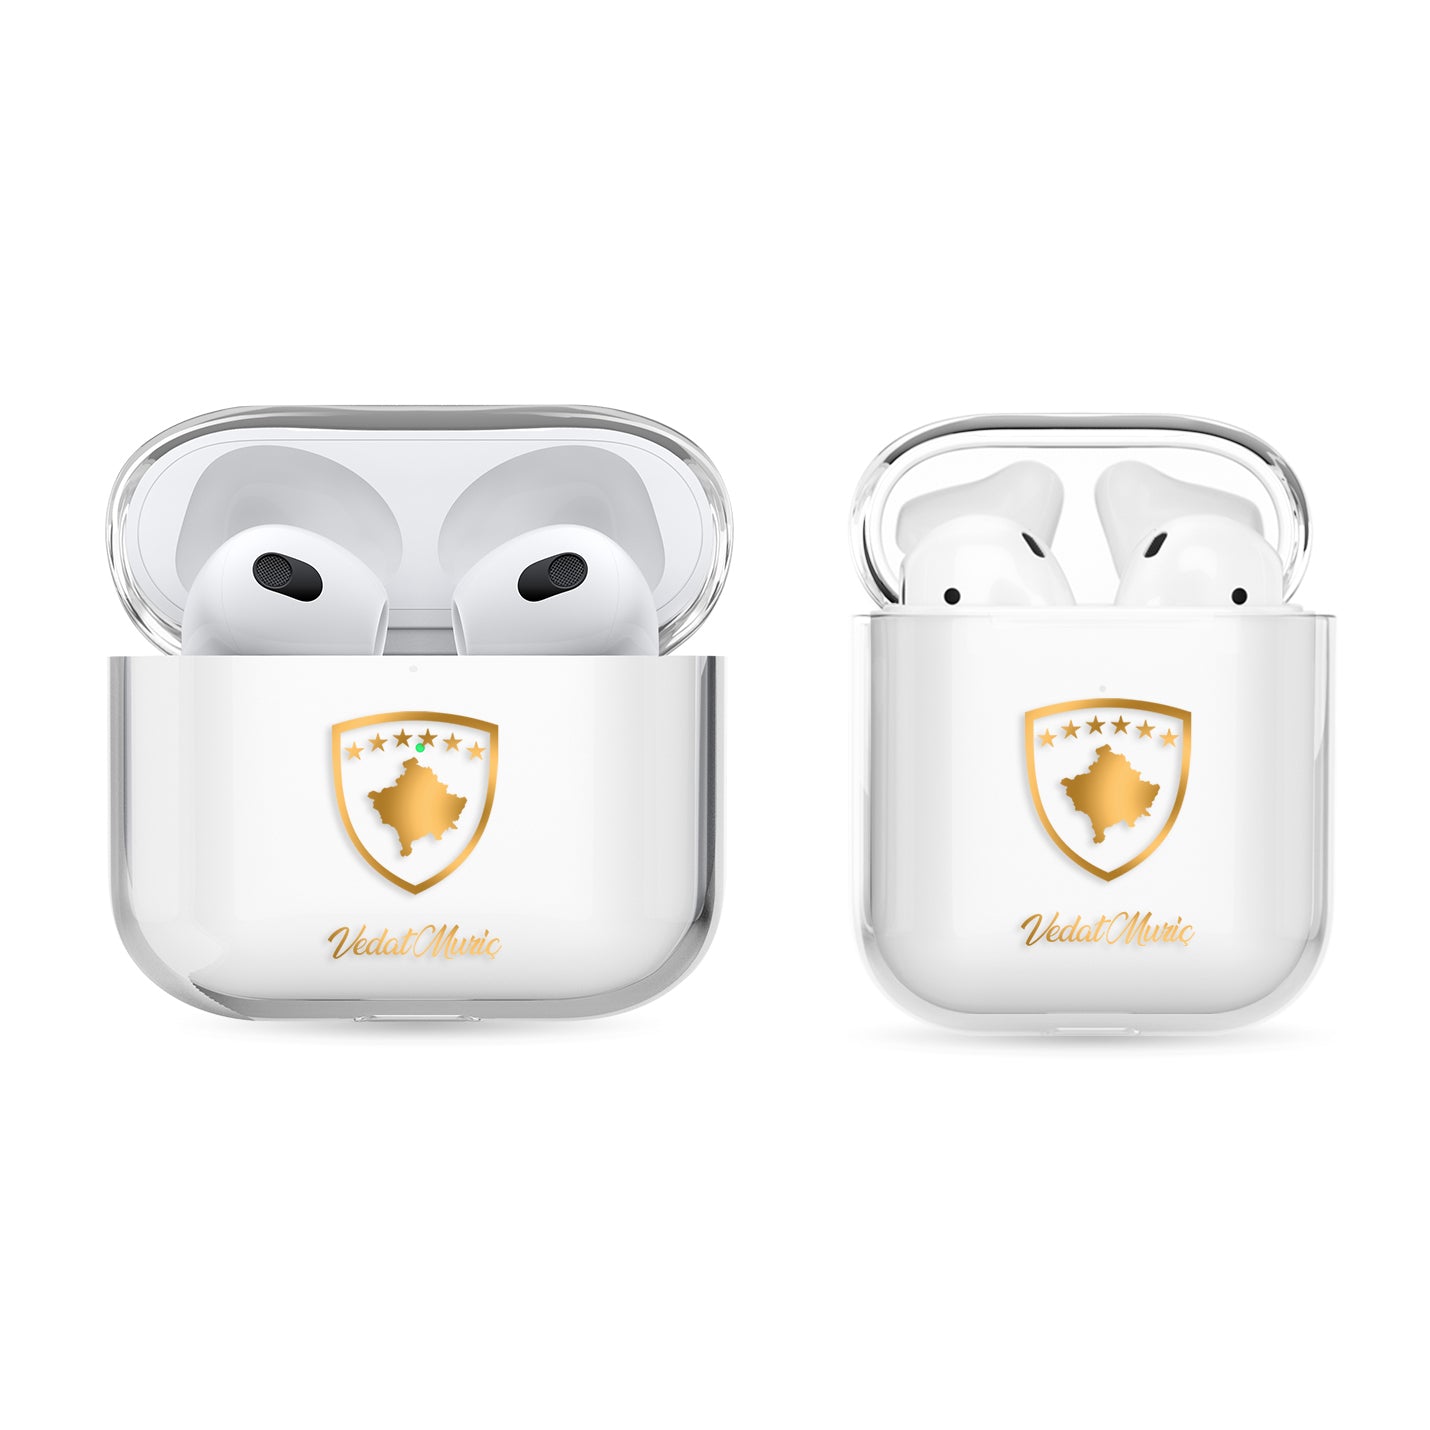 Airpods Hülle - Kosovo - 1instaphone